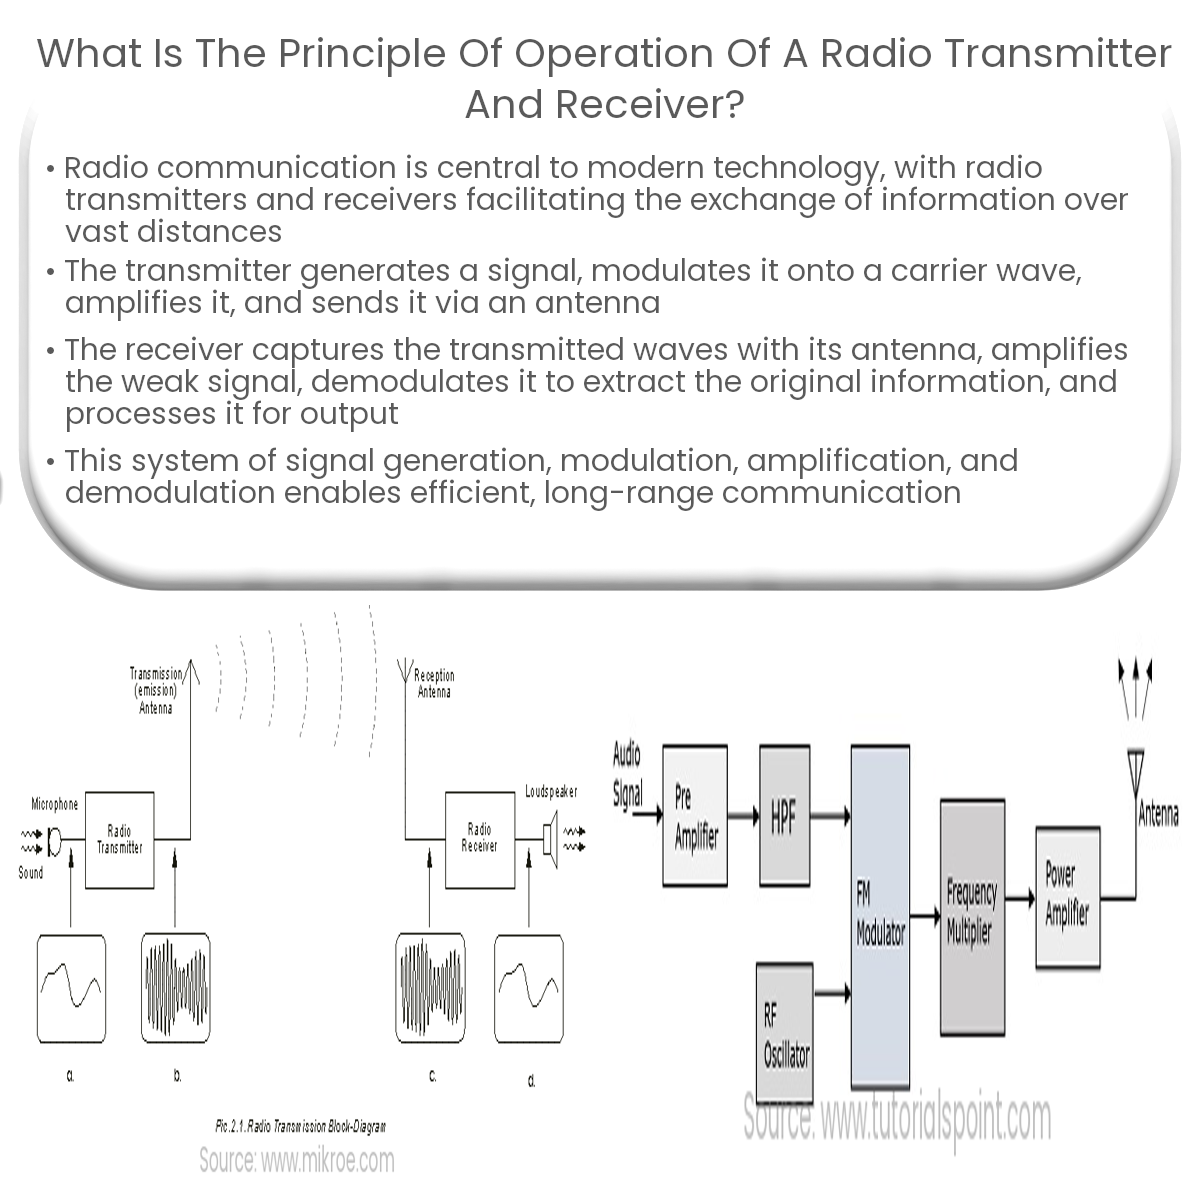 What is the principle of operation of a radio transmitter and